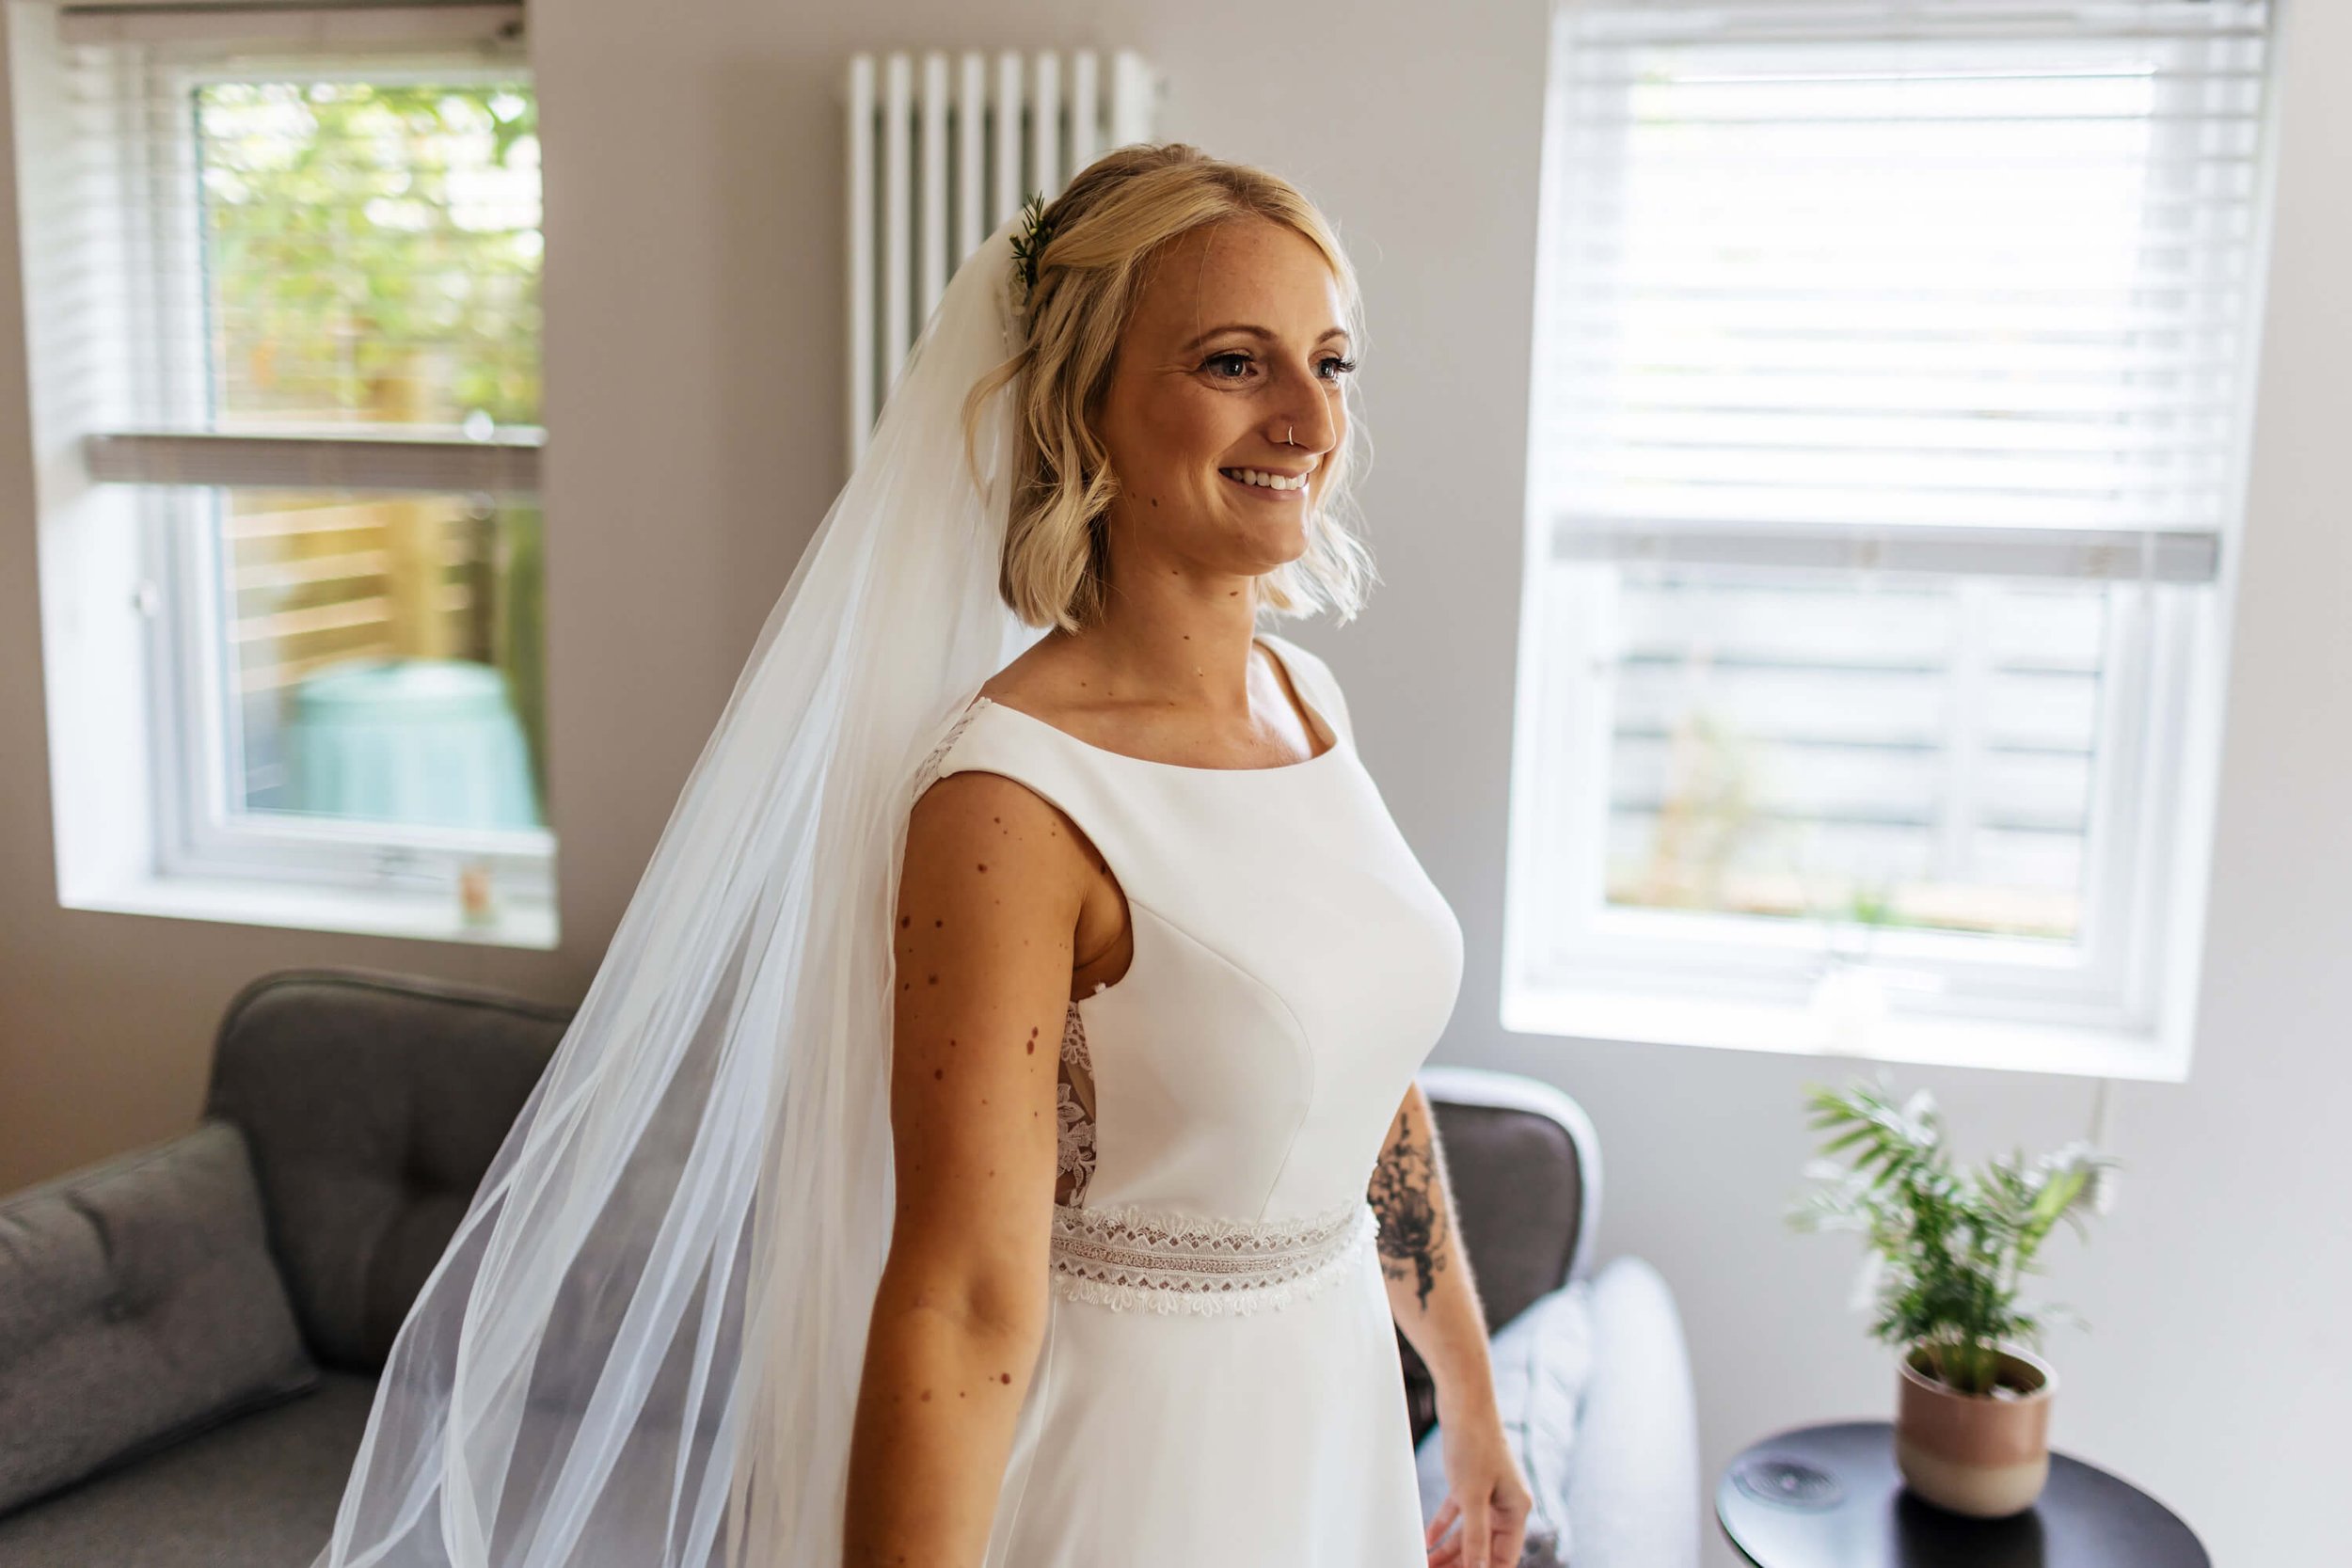 Bride smiling on her wedding morning in the dress